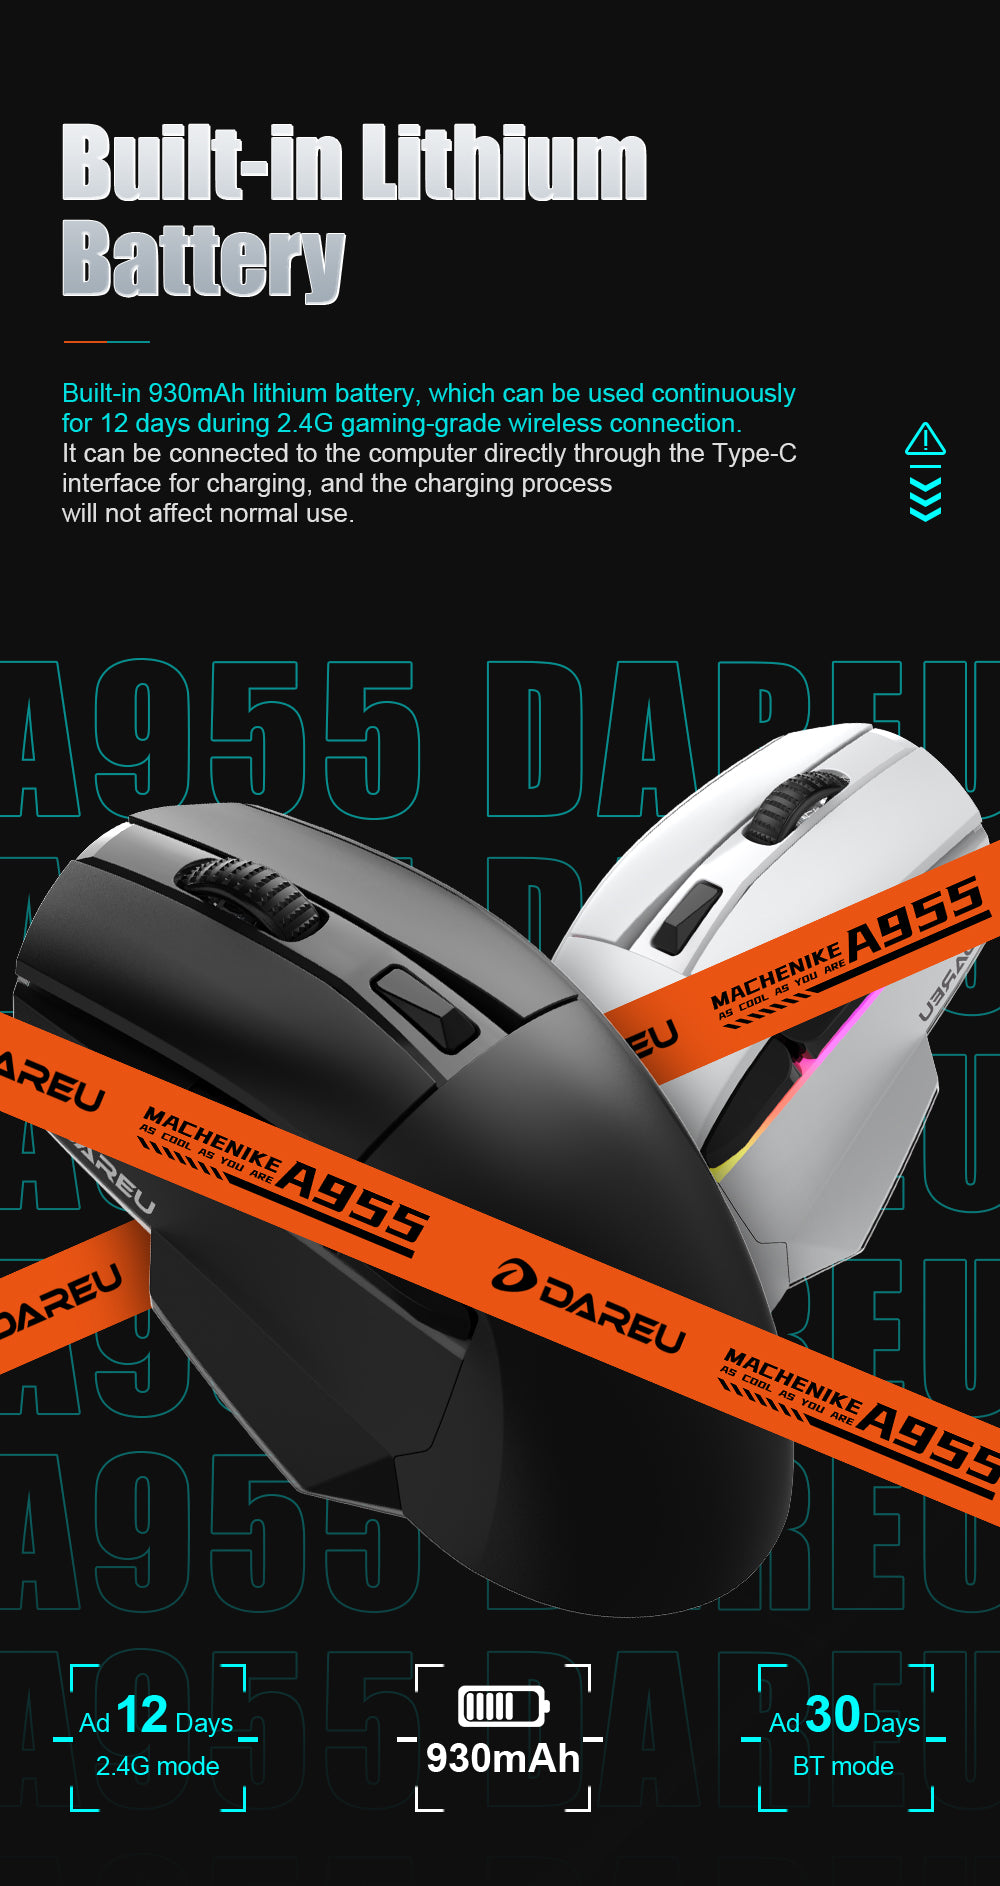 DAREU A955 Tri-Mode Wireless Gaming Mouse ft. AIM-WL Optical Sensor, Transparent Micro Switches, Transparent Bottom Cover & Magnetic Charging Base